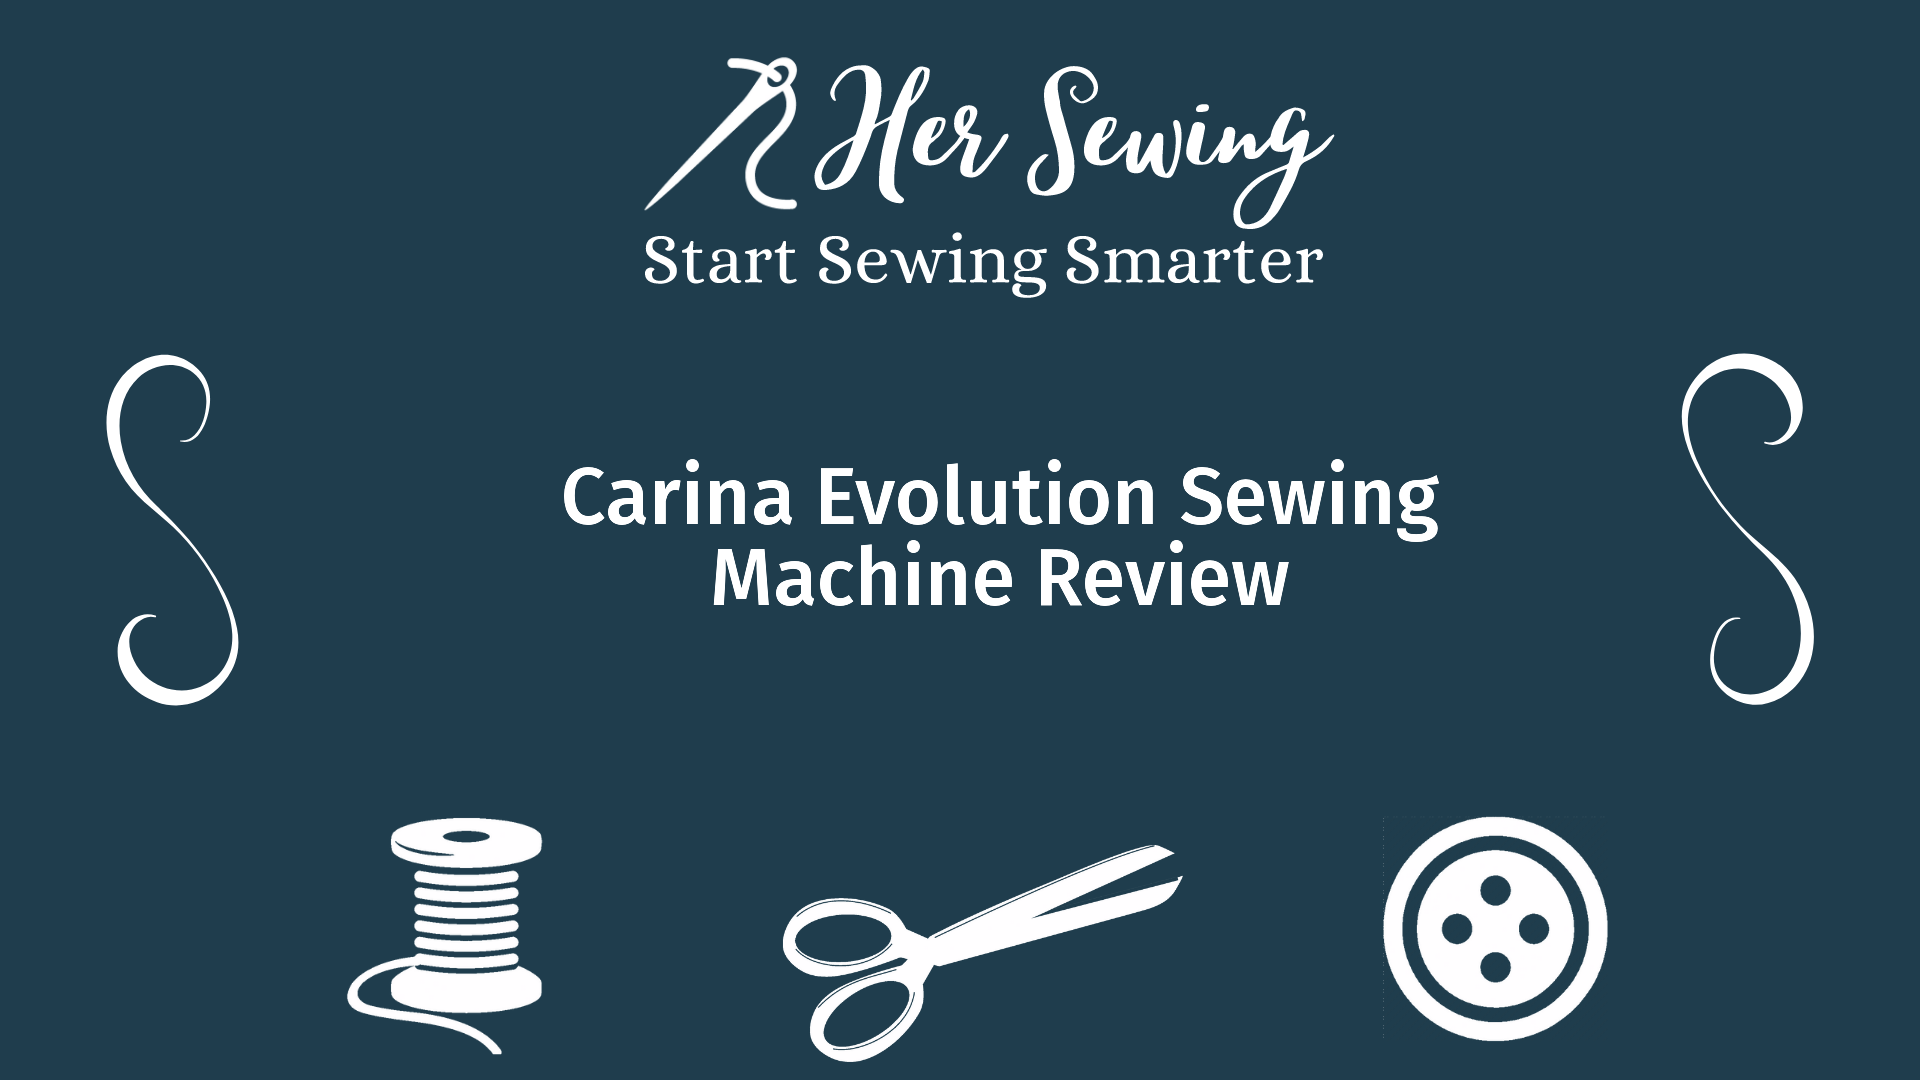 Carina Evolution Sewing Machine Review